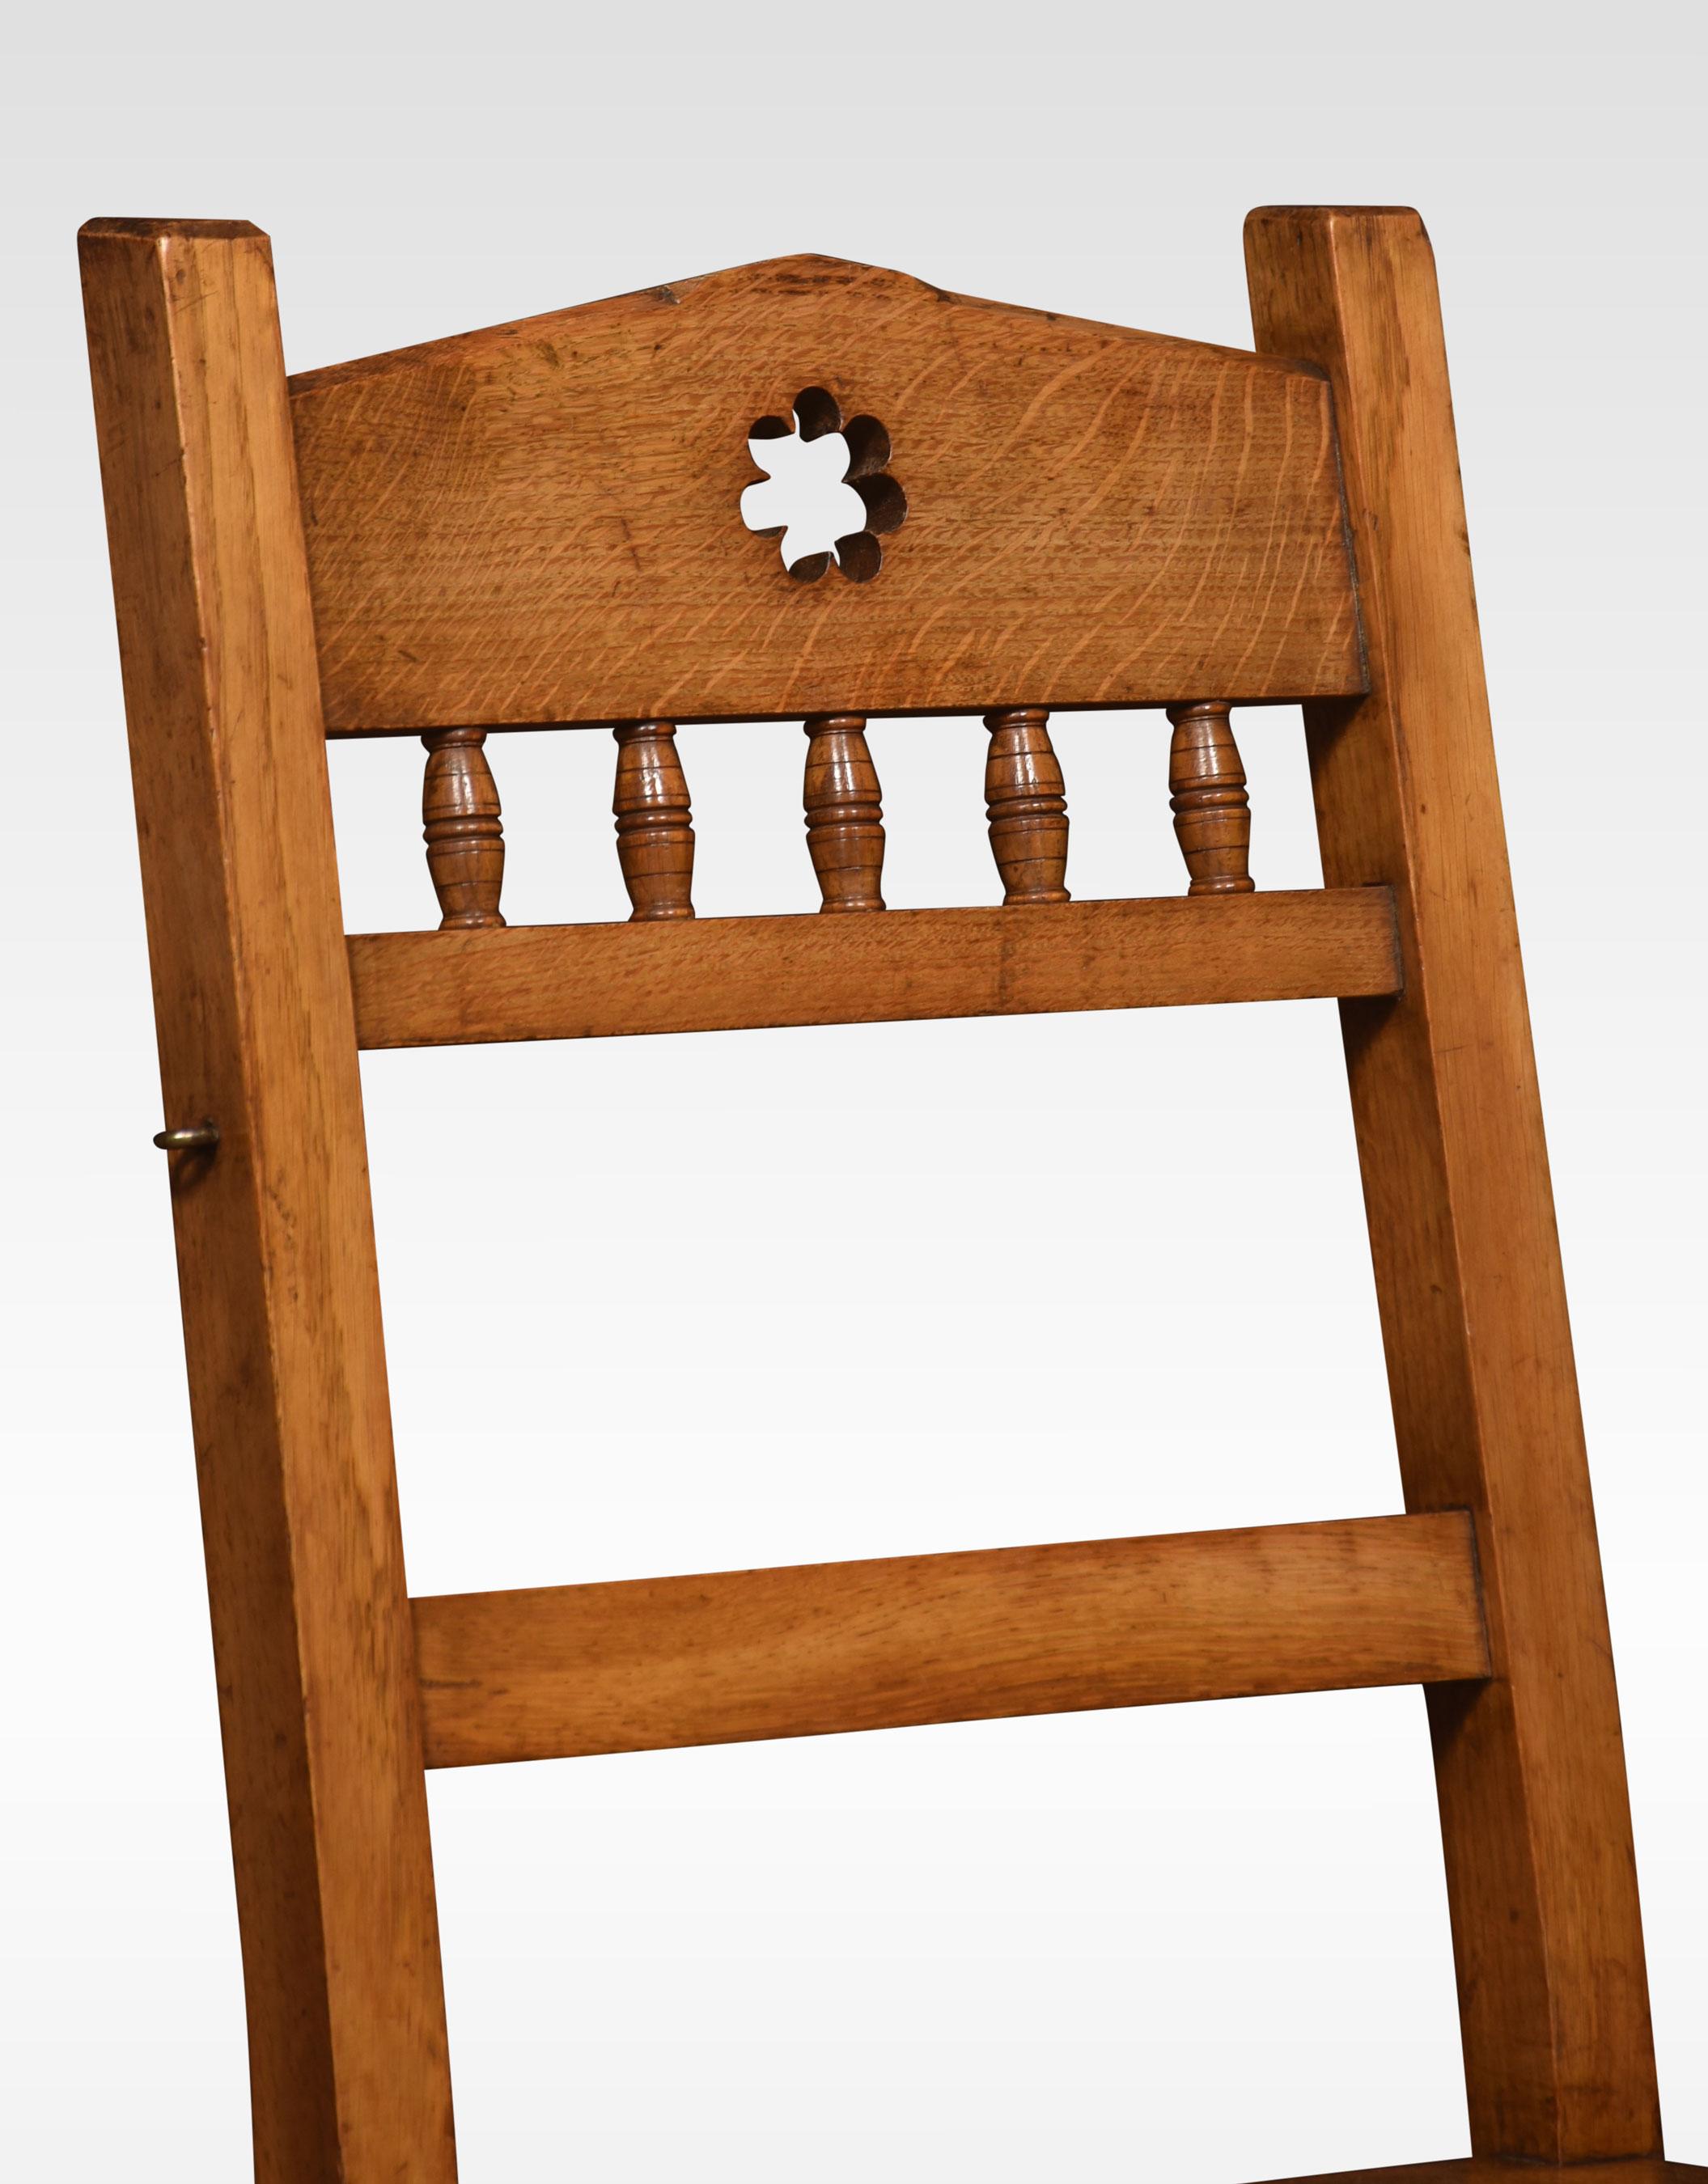 19th Century oak metamorphic chair, with spindle back above solid seat the chair opens into a sturdy set of Library steps.
Dimensions
Height 34.5 Inches height to seat 17.5 Inches
Width 17 Inches
Depth 16.5 Inches